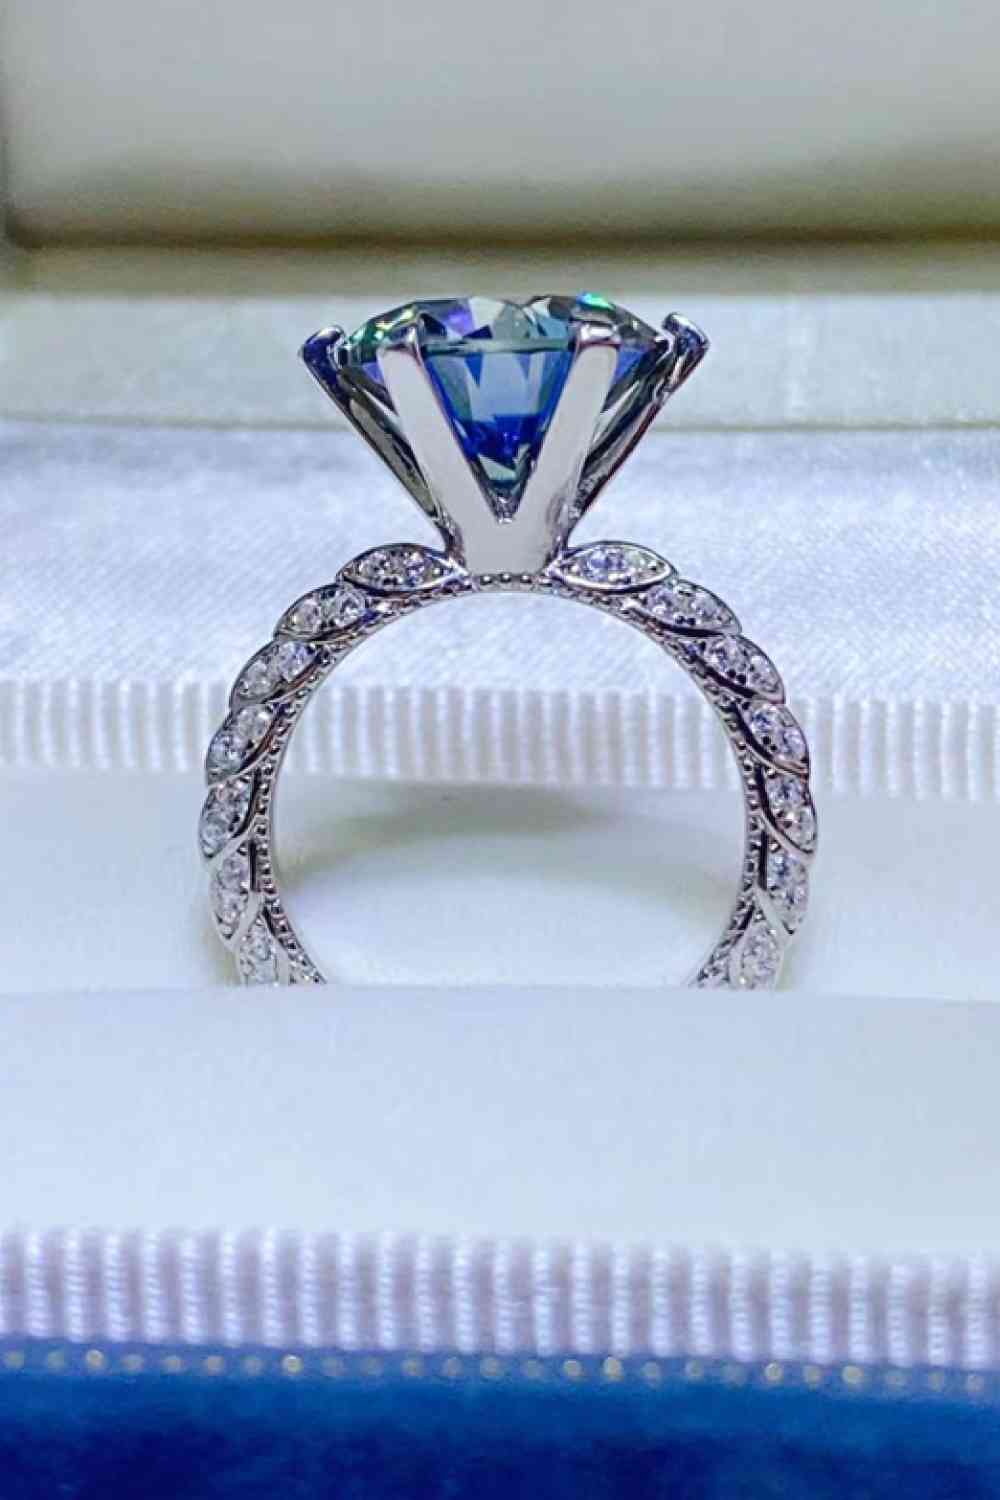 a diamond ring with a blue center surrounded by diamonds